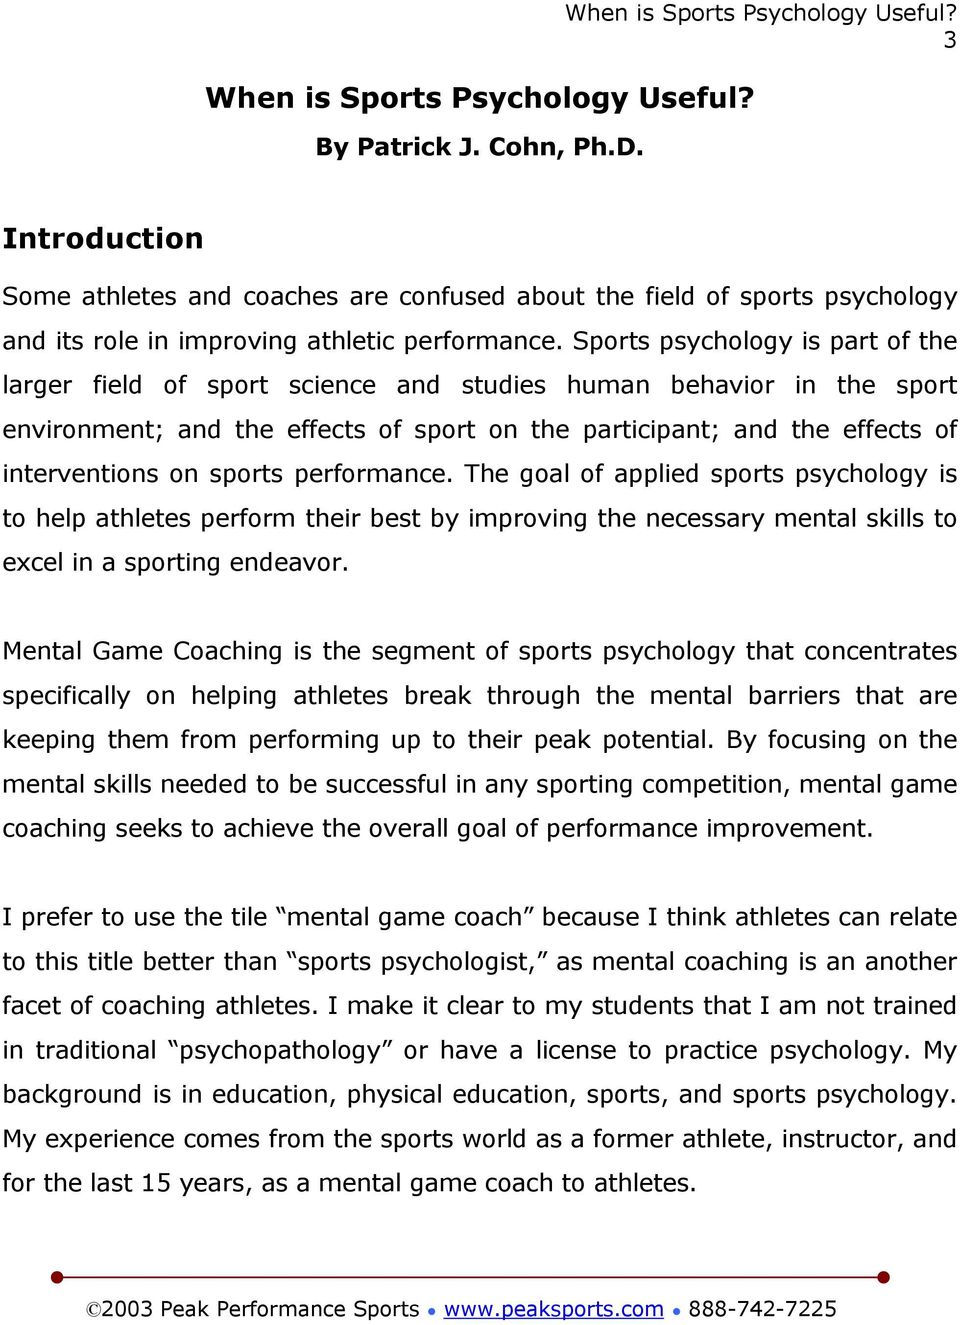 sports performance. The goal of applied sports psychology is to help athletes perform their best by improving the necessary mental skills to excel in a sporting endeavor.